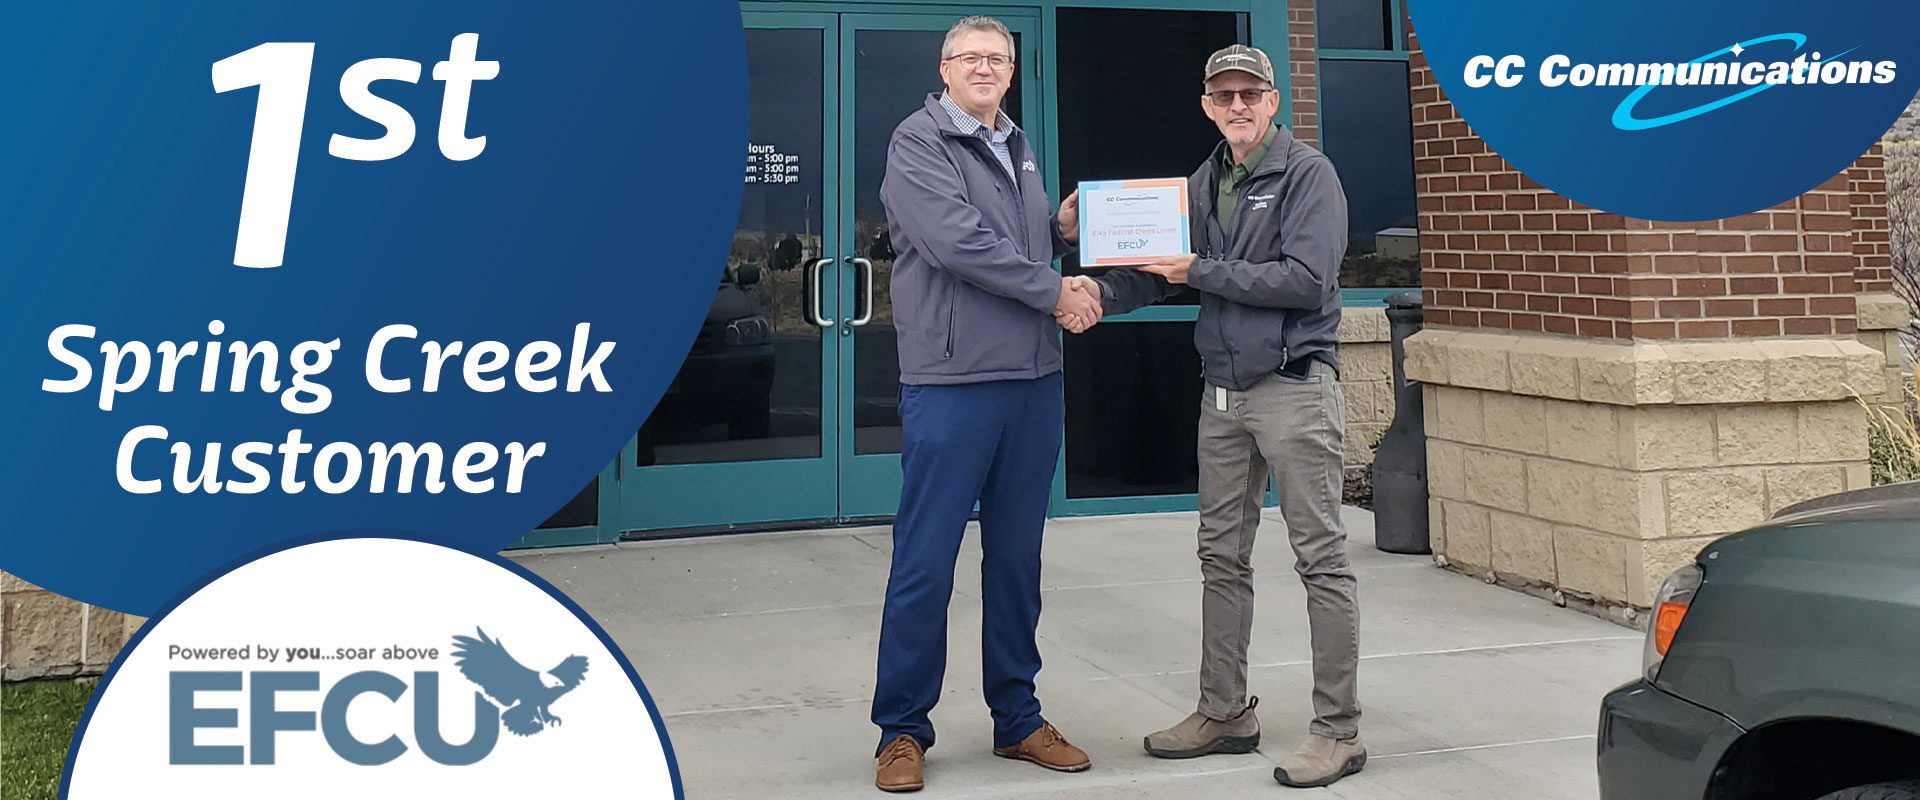 David Tilley and Rhyan Meade, of EFCU, shaking hands for Elko Federal Credit Union being CC Communications' First Spring Creek Customer.